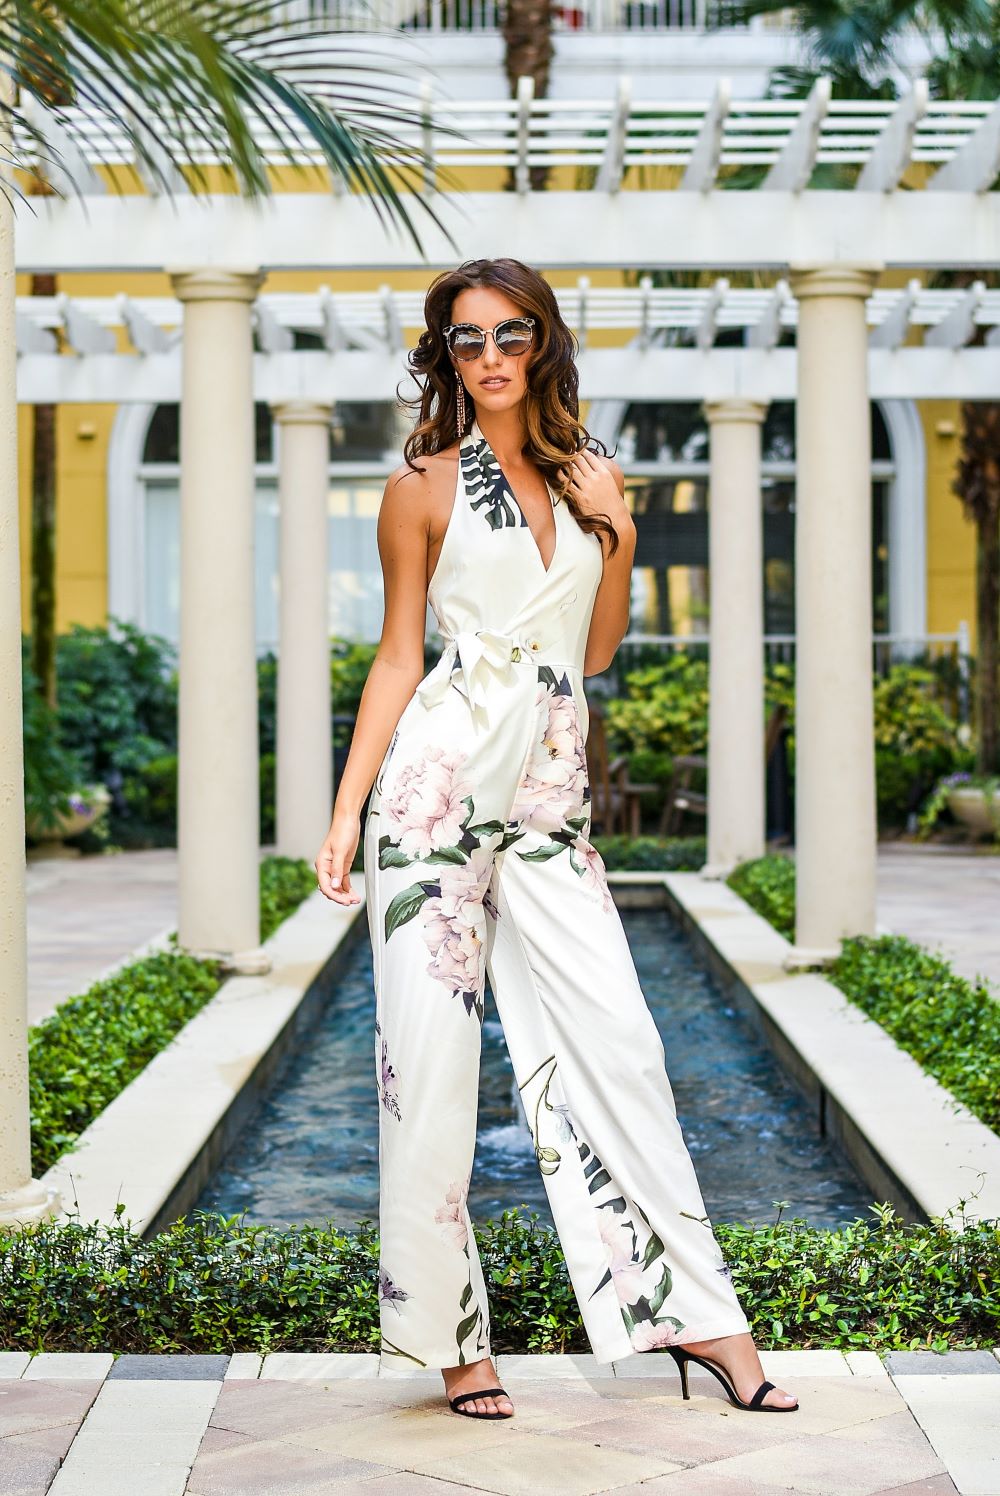 Jungle themed party outfits jumpsuit